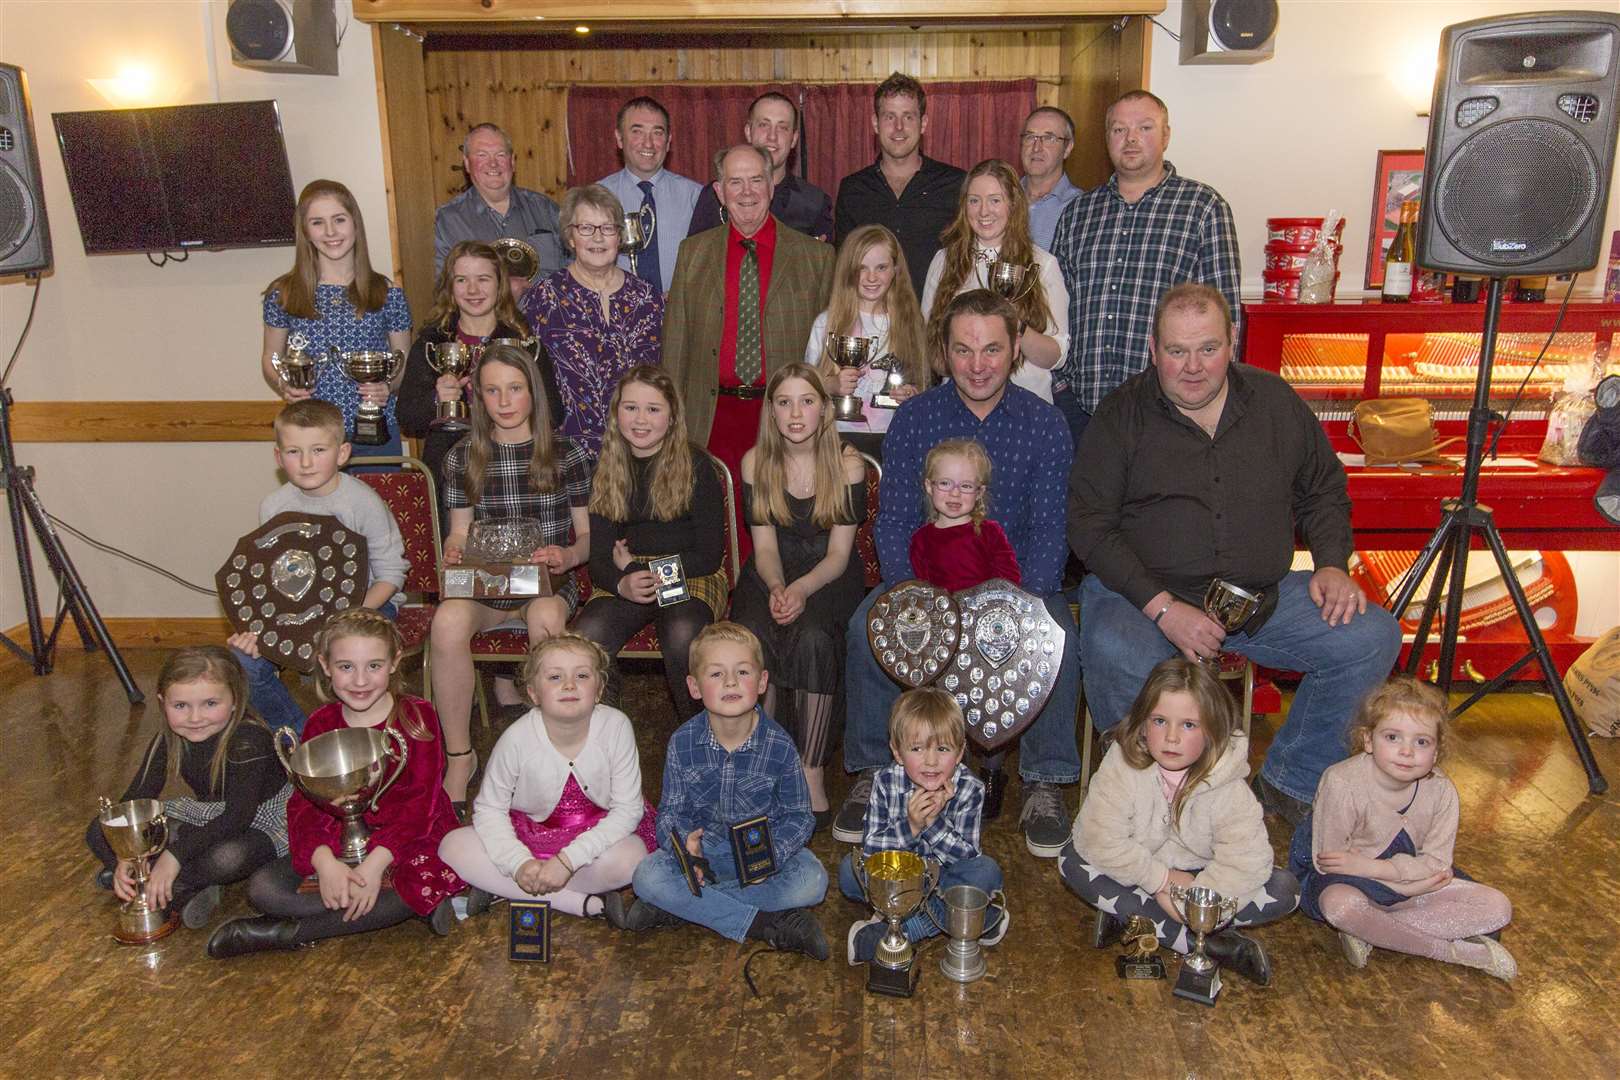 Some of the trophy-winners from this year's Canisbay Show pose for a photograph along with guest speaker, retired Canisbay Church of Scotland minister Lyall Rennie (standing, centre) and his wife Isobel (centre, left). The presentations took place during a dinner in the Seaview Hotel, John O'Groats, on Saturday night. Picture: Robert MacDonald / Northern Studios